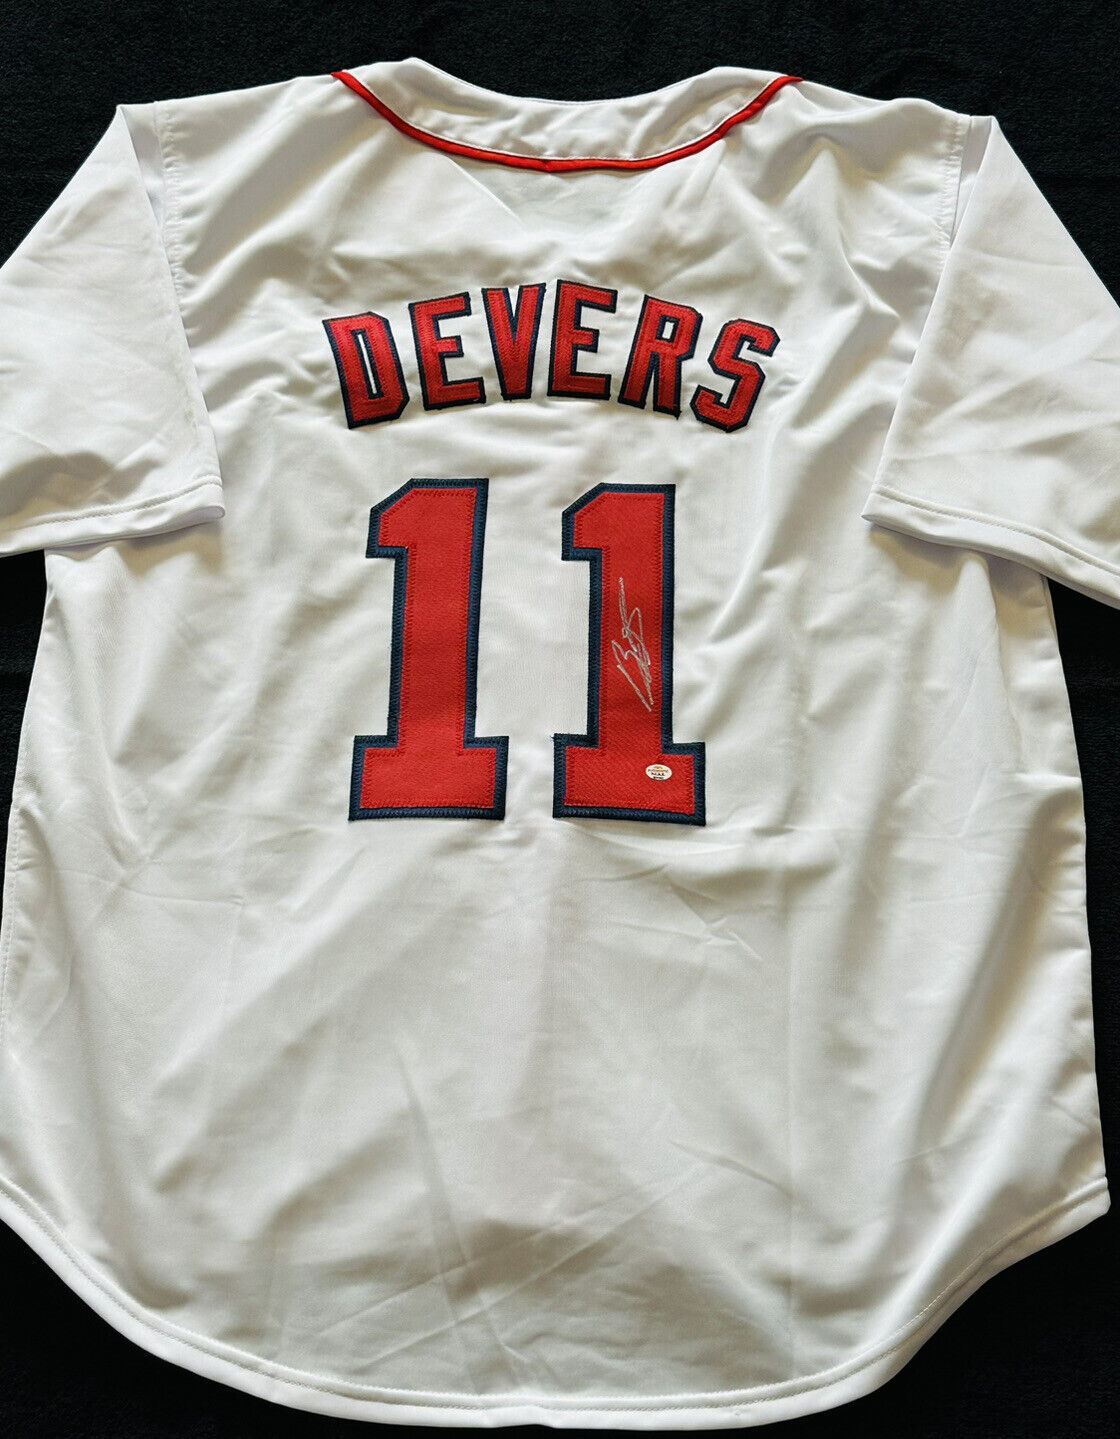 red sox jersey devers